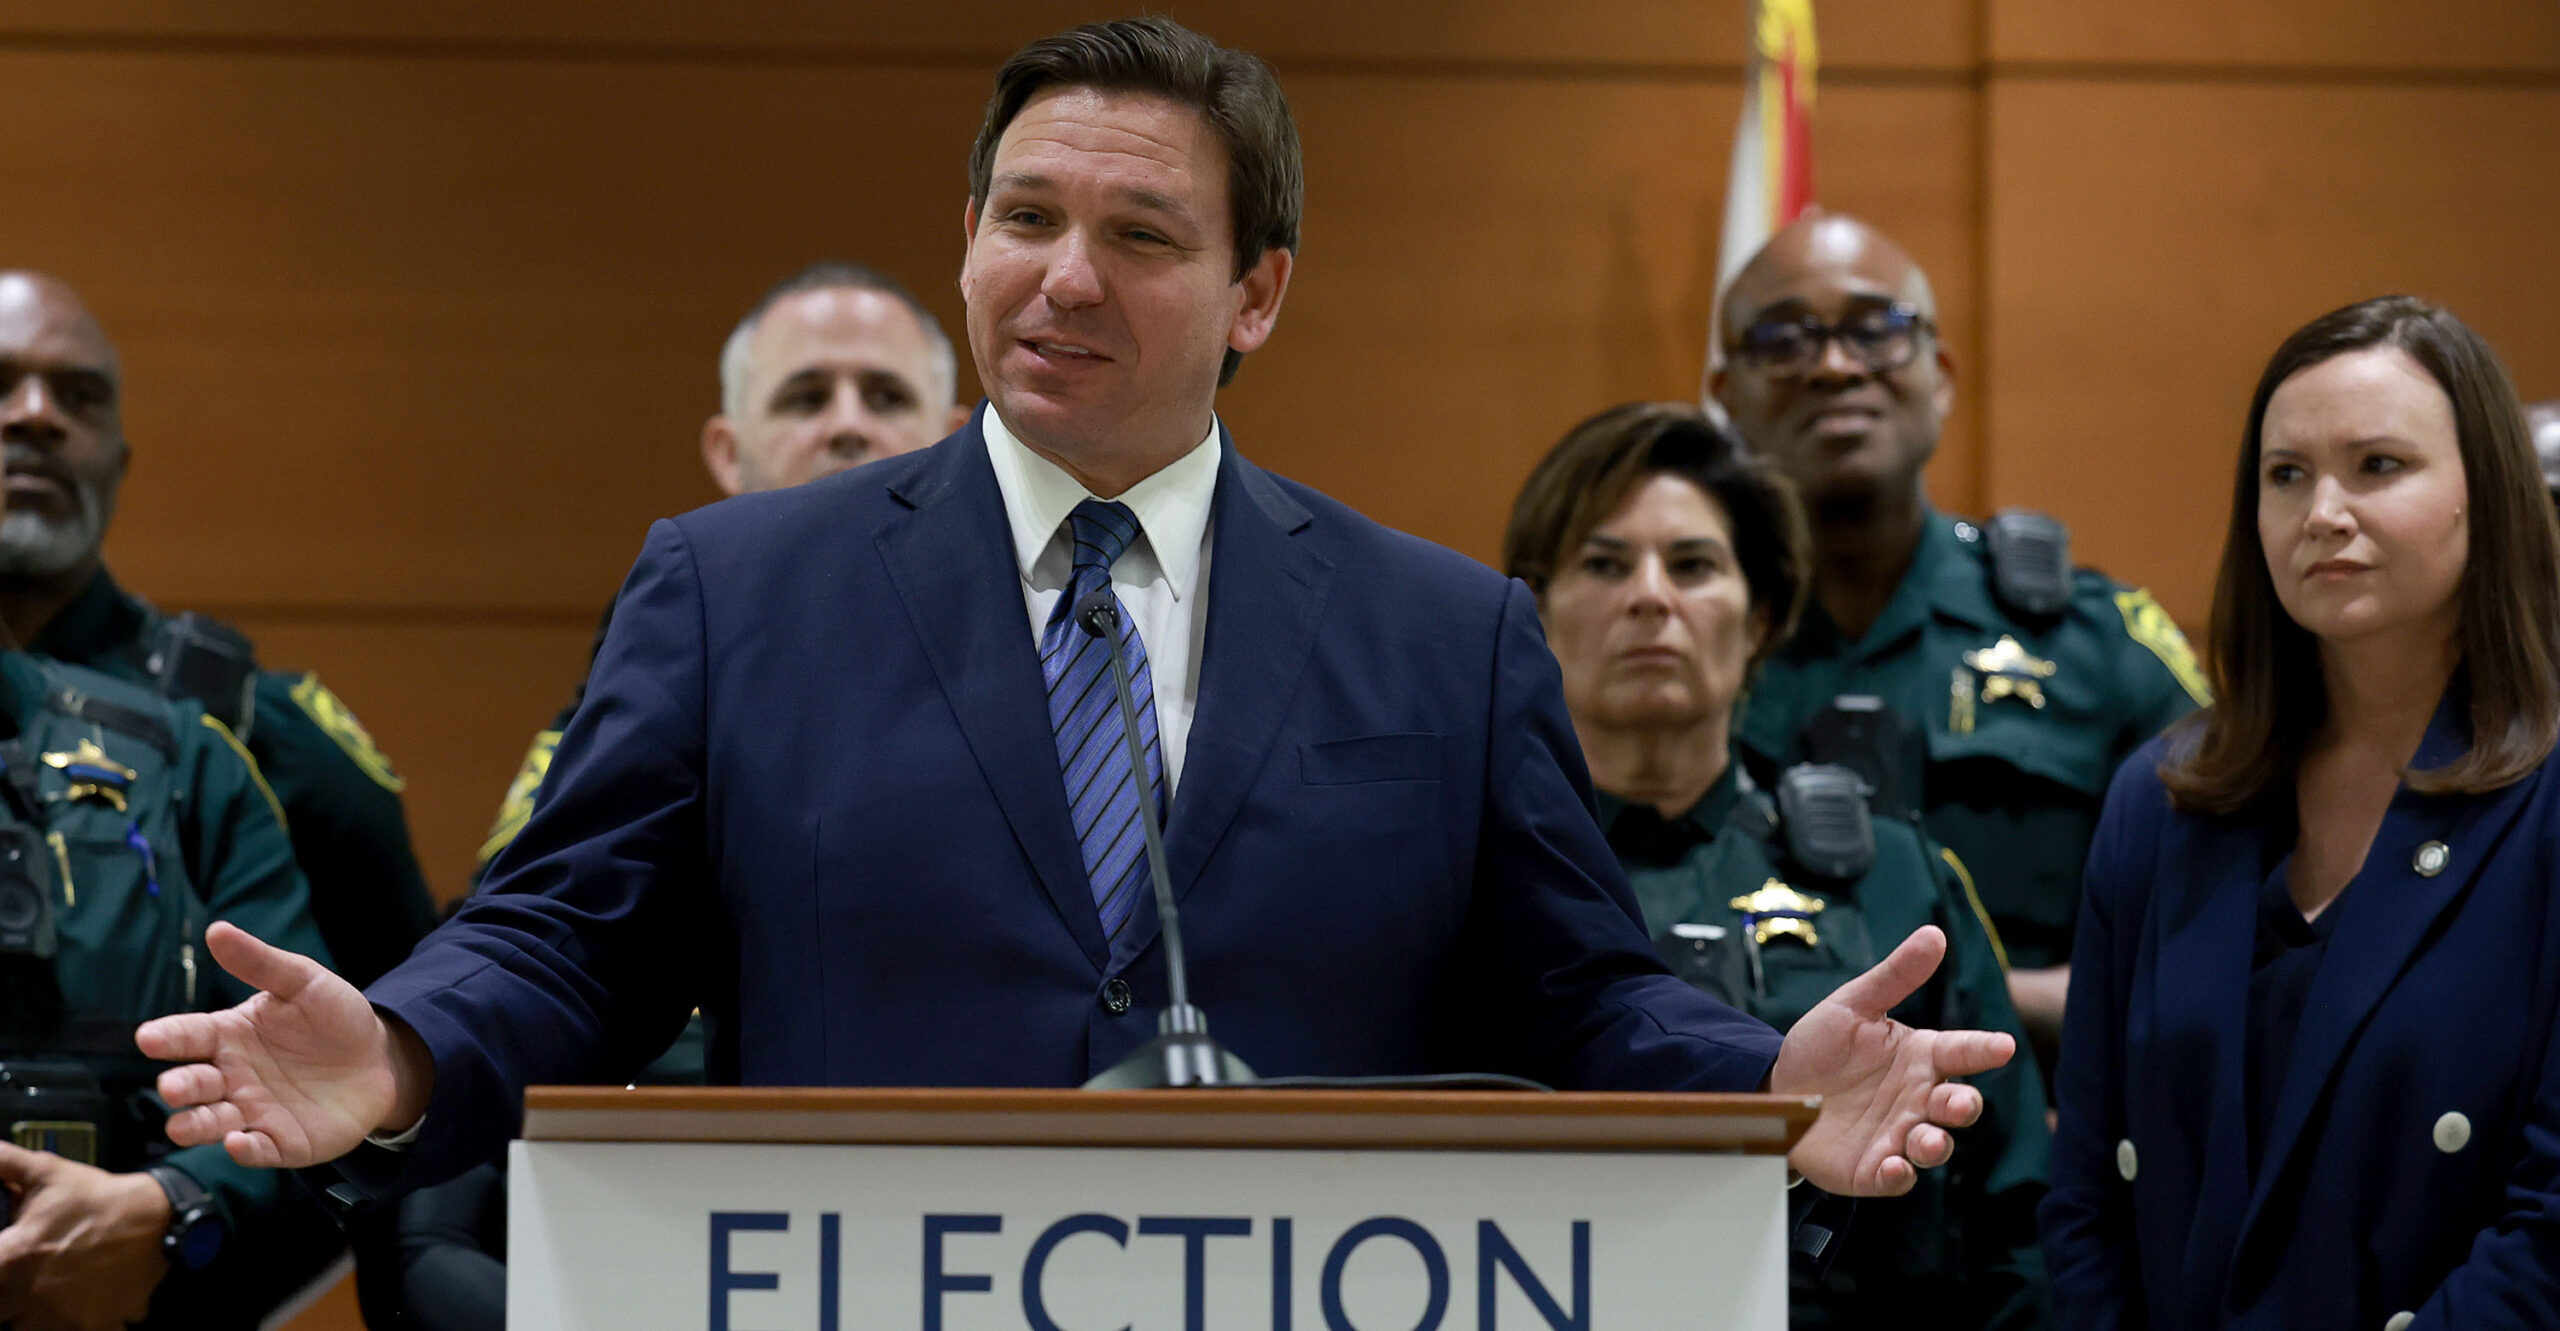 'Election Fraud … Does Happen,' Florida Official Says as His Office Charges More Than 20 People With Election Crimes